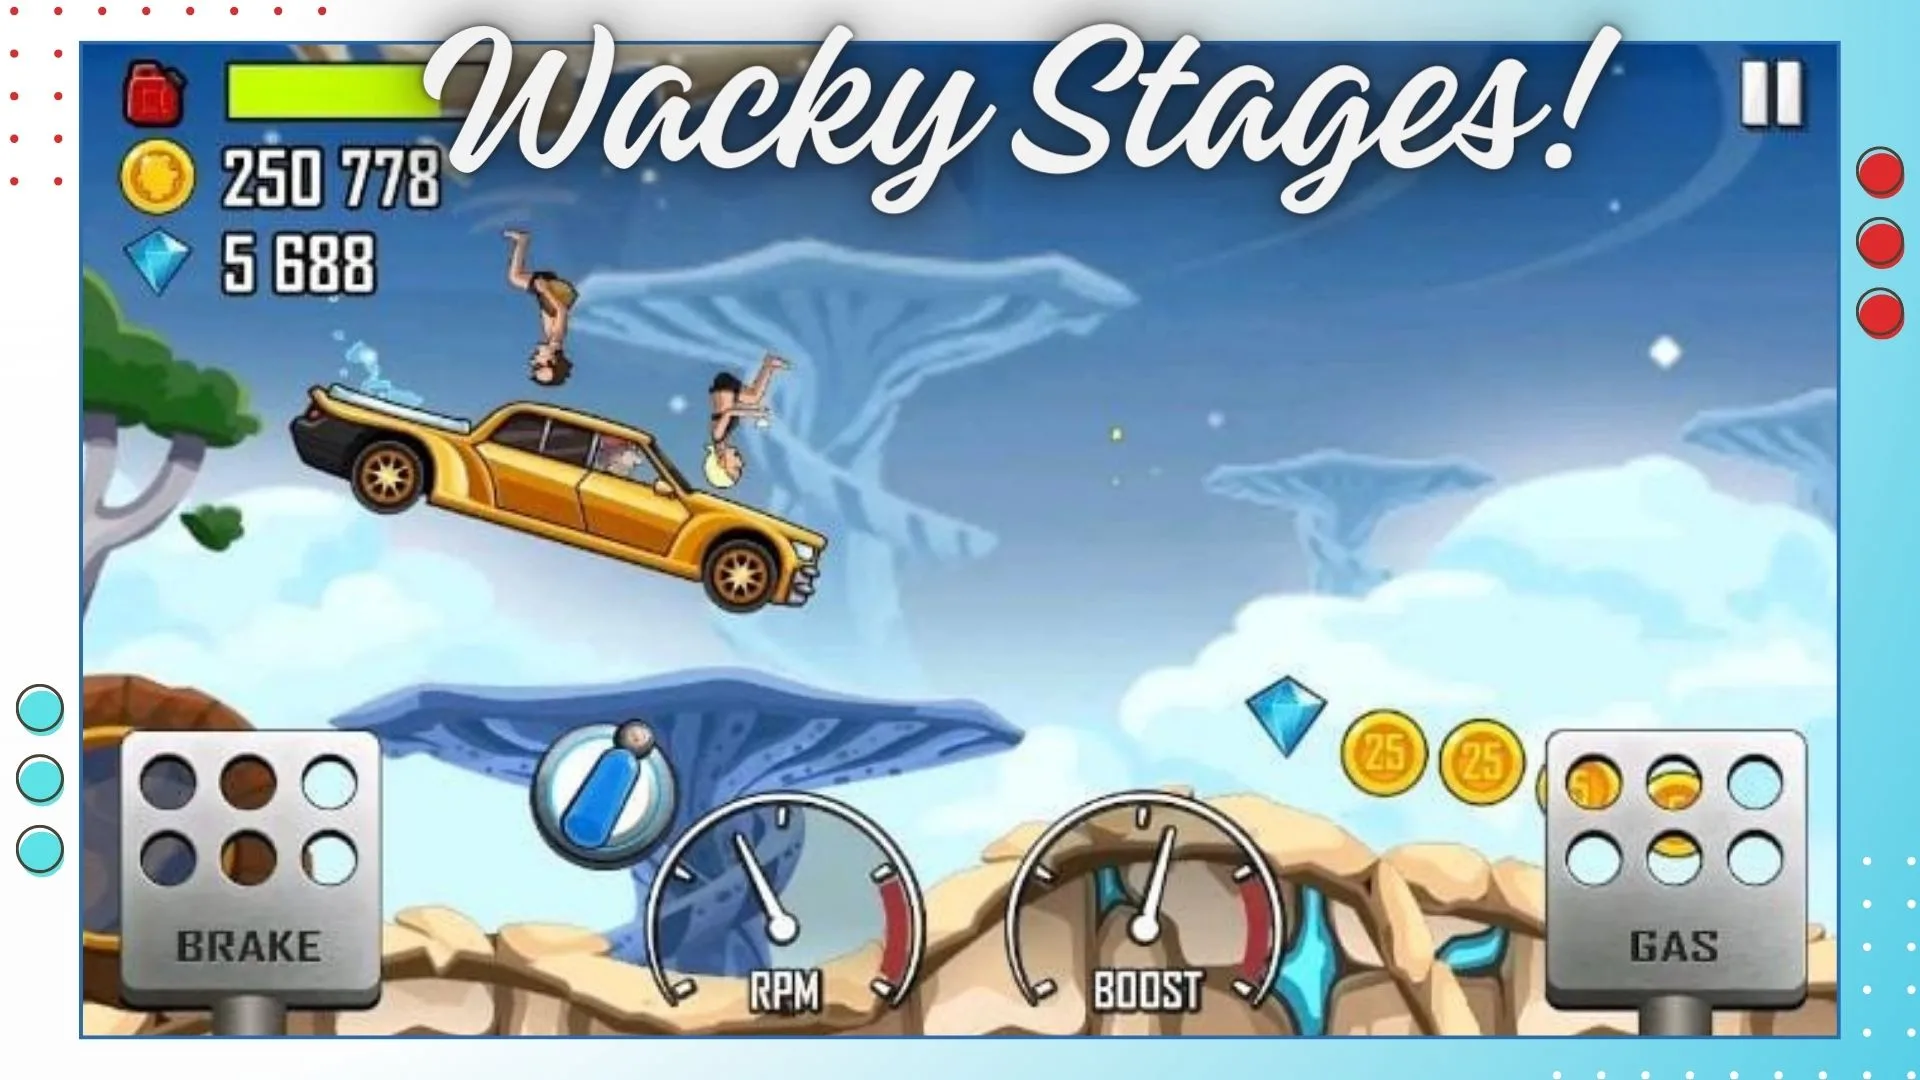 Experience the canyon climb's fun and wacky stages in Hill Climb Racing.